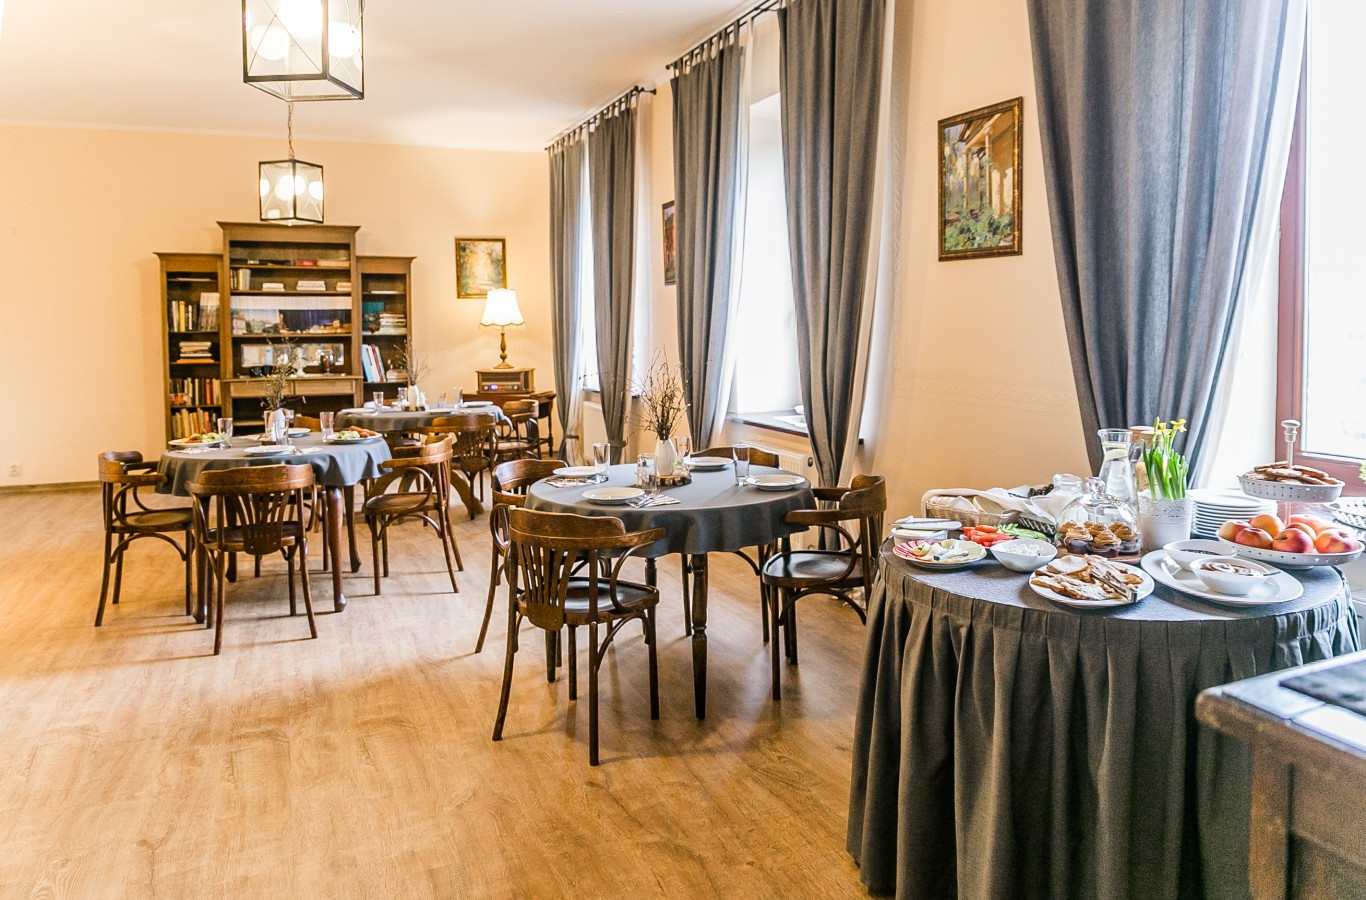 Conference rooms | Cesis Municipality | Liepas Manor | picture